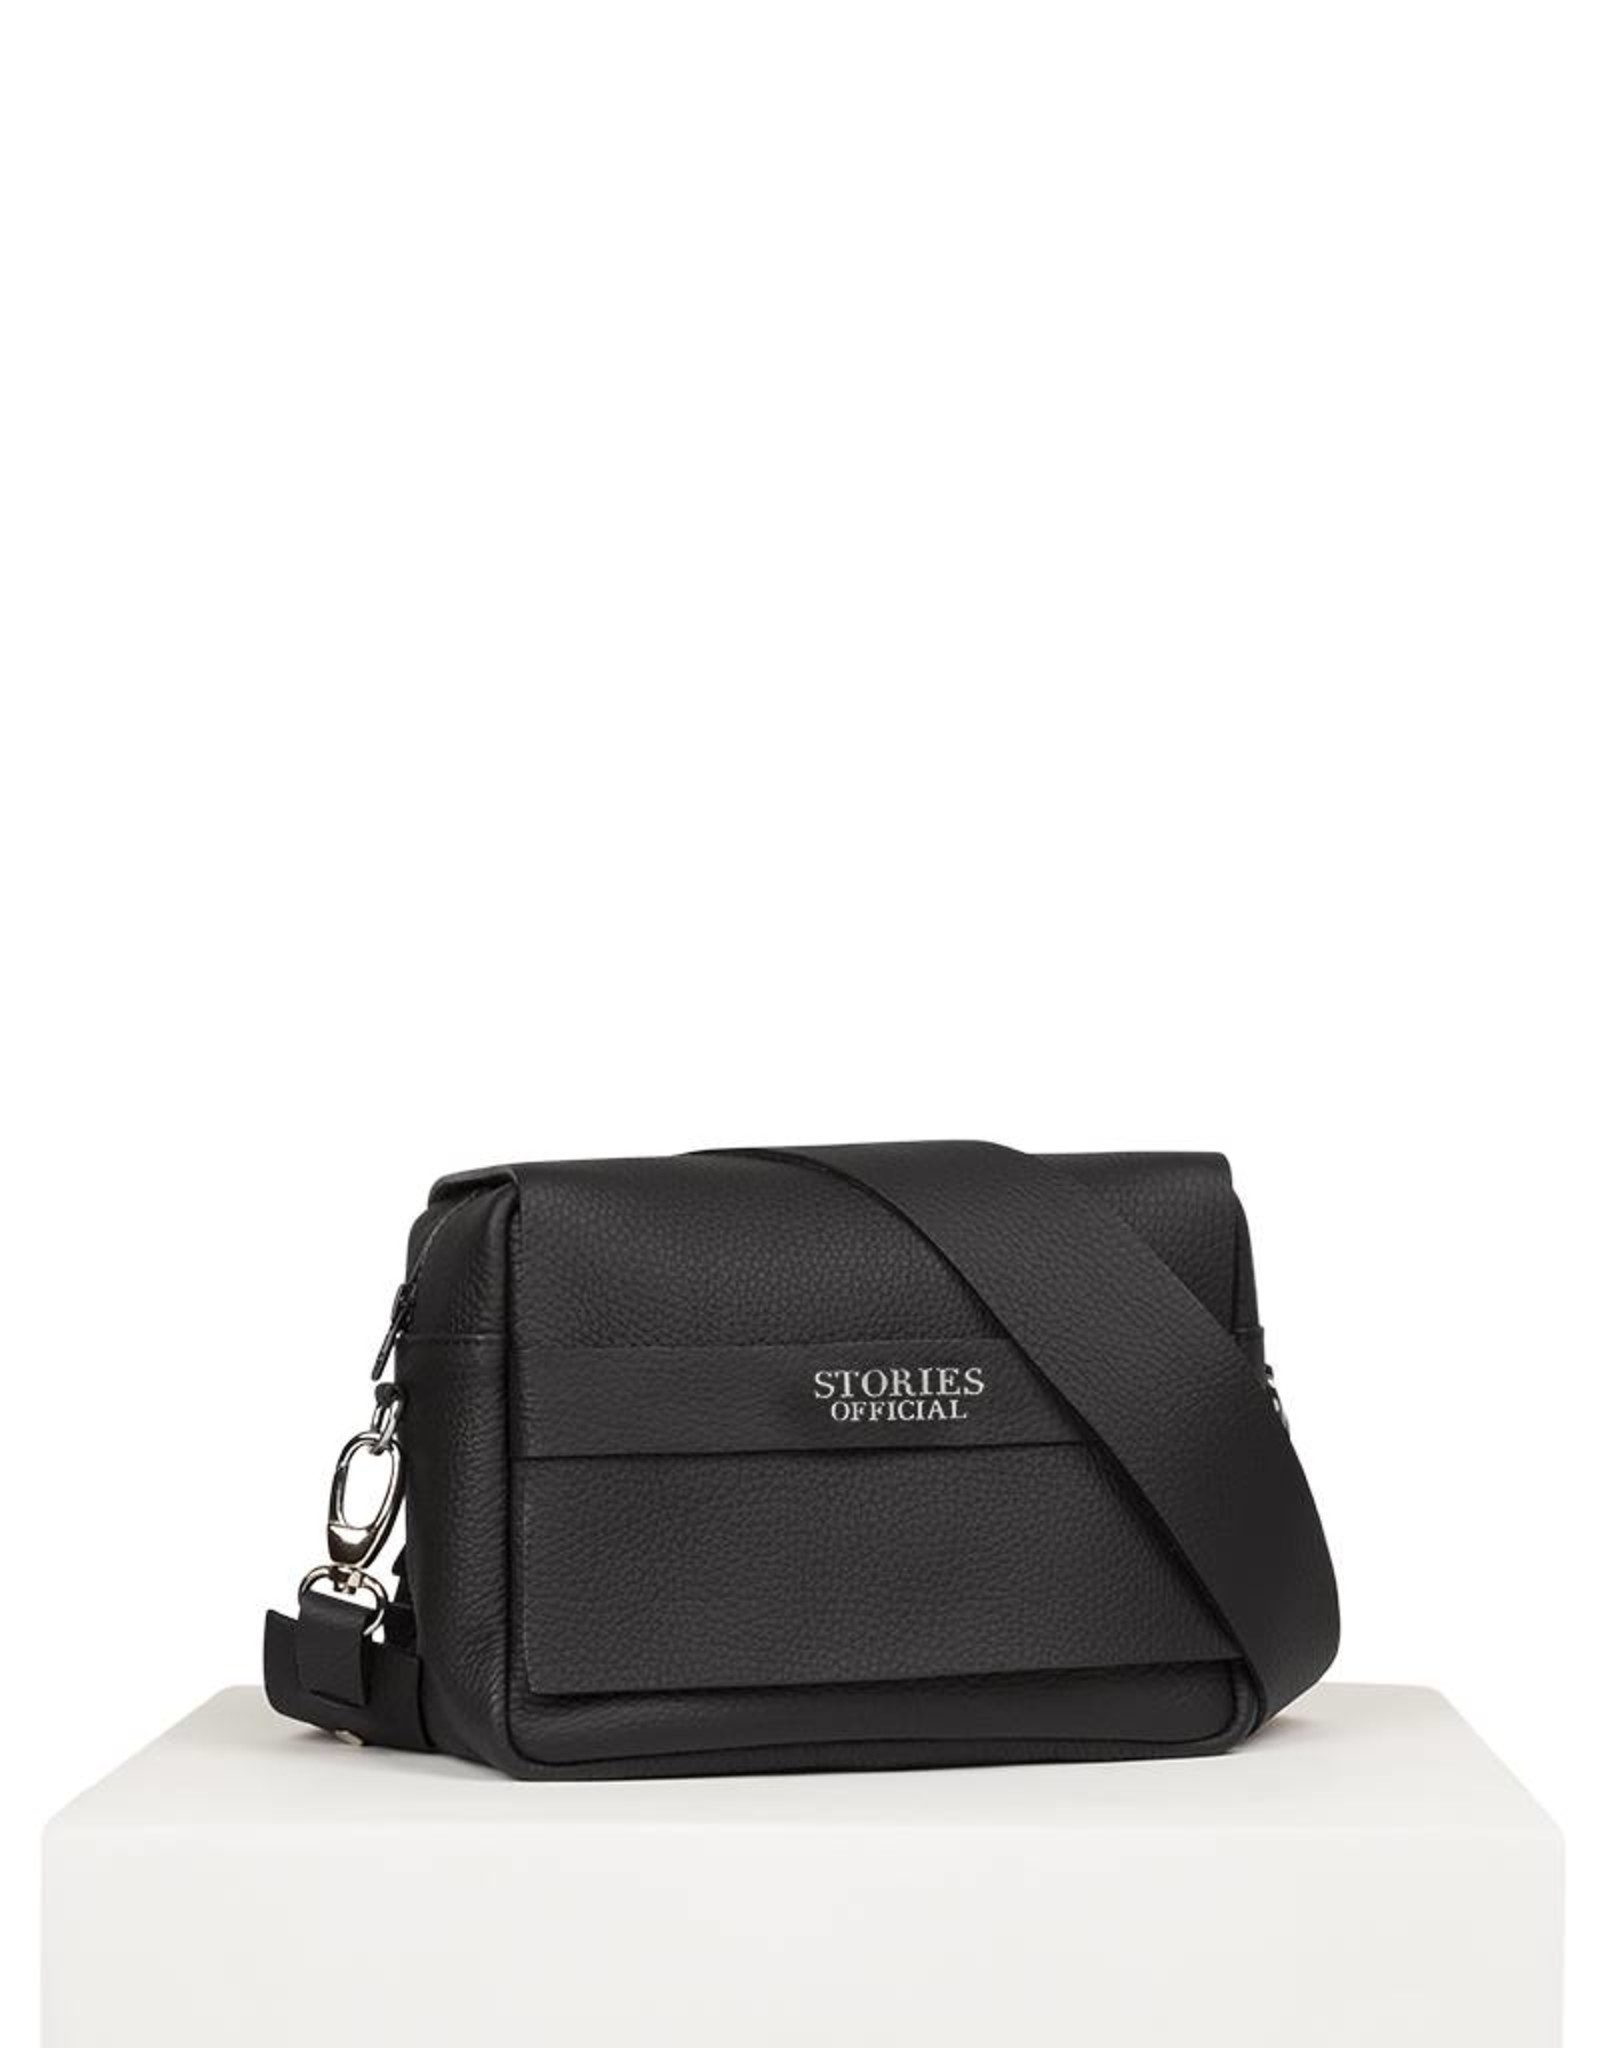 Small zipped leather shoulderbag, Black. - Stories Official